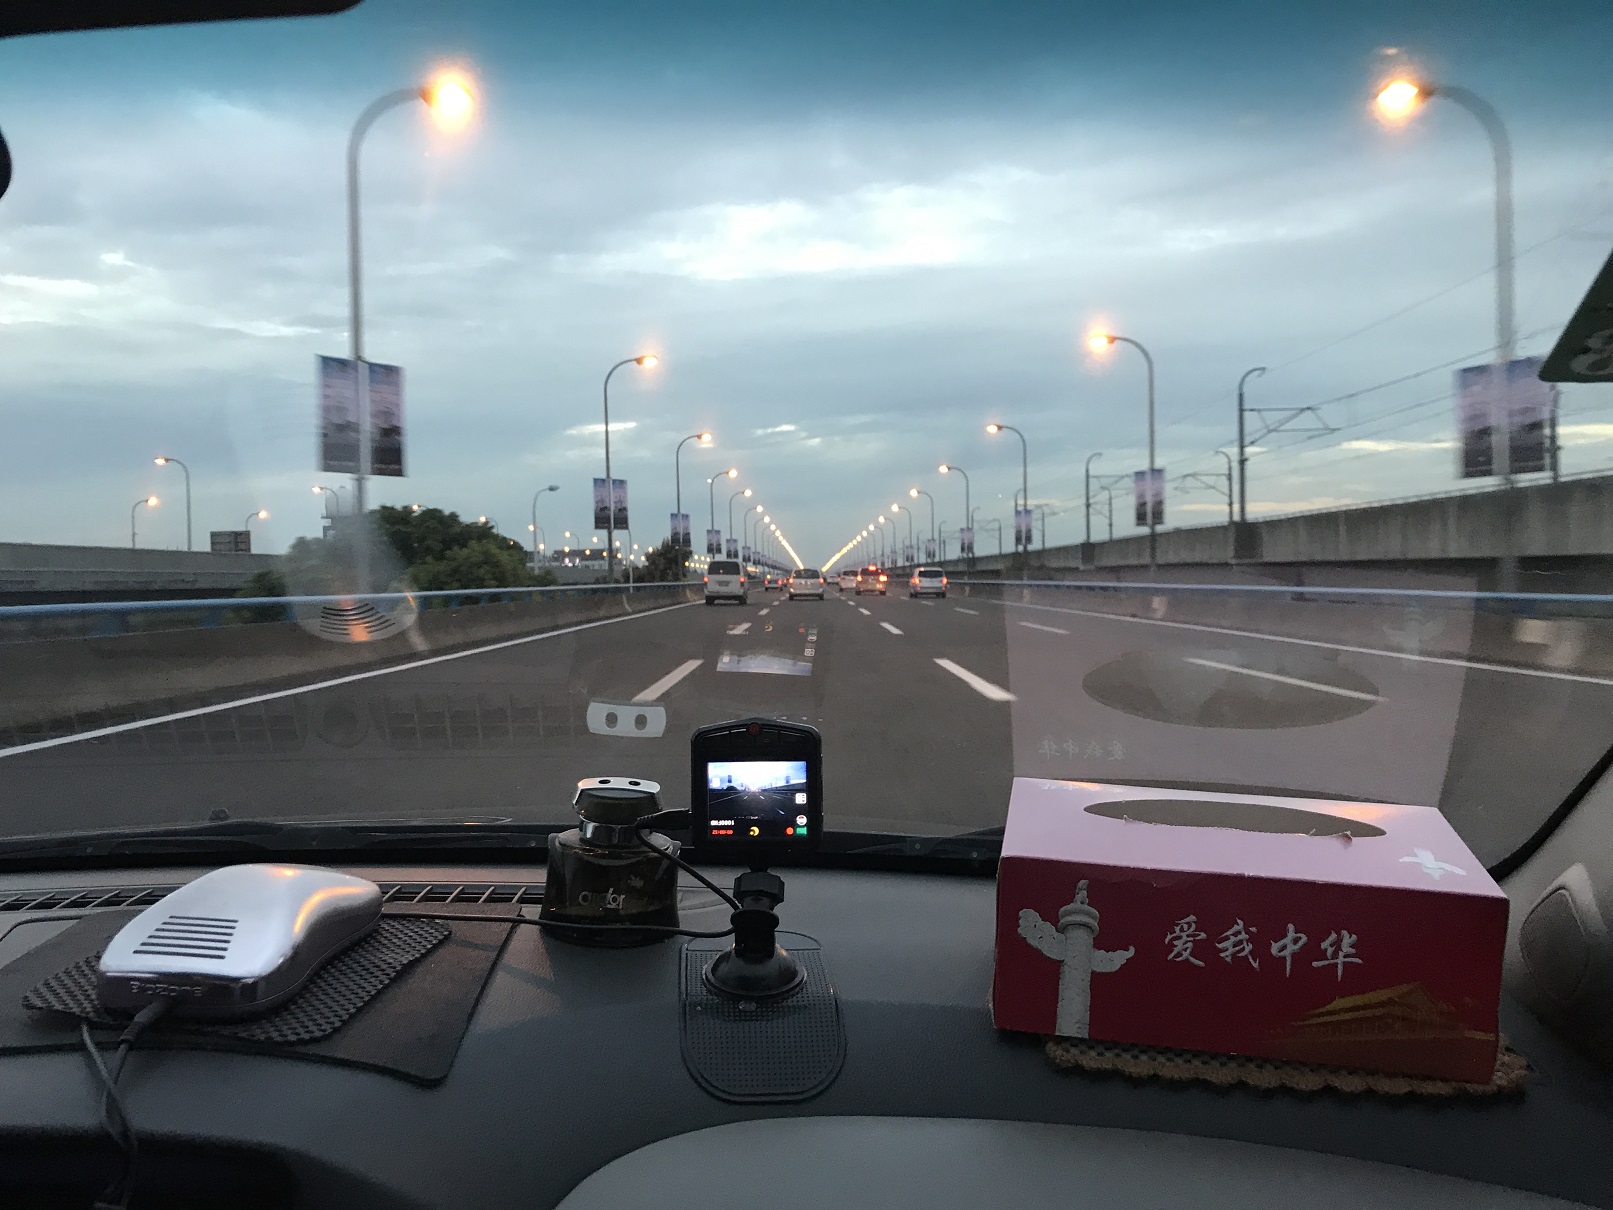 On the way home in Shanghai!